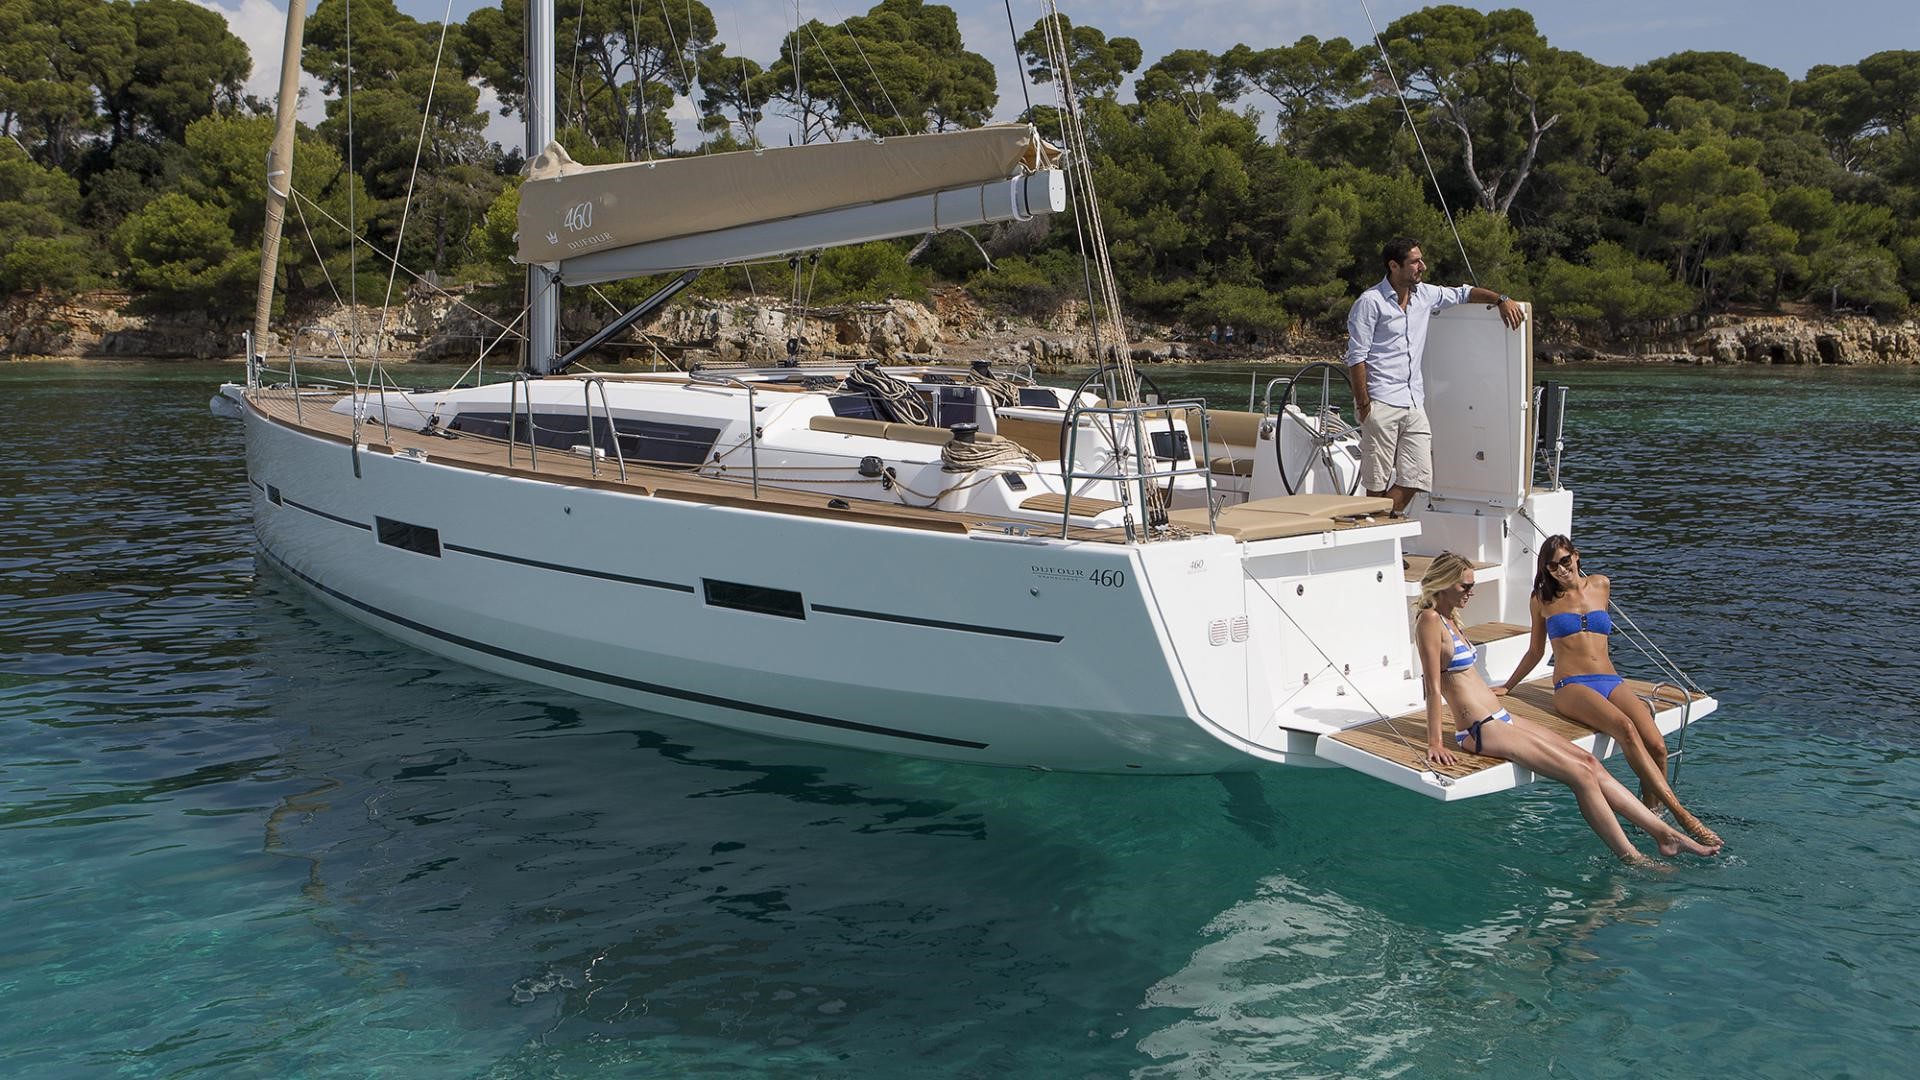 DUFOUR 460 GRAND`LARGE (4 CABINS, FROM 2016)